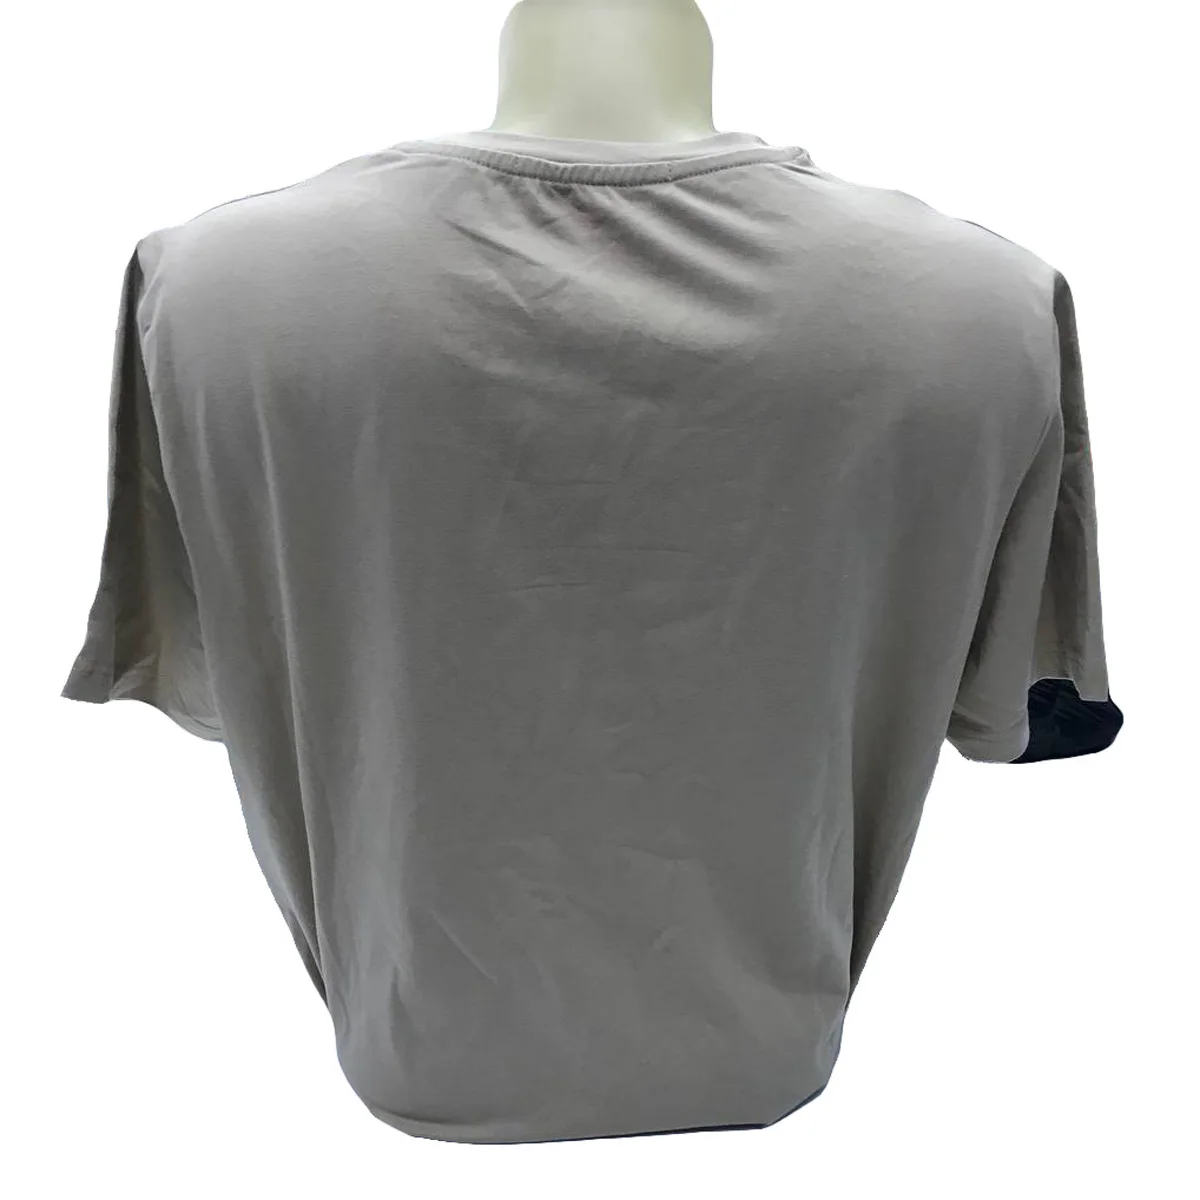 Quality T-shirt (oversize) Comfortable To Wear Own Production - Buy ...